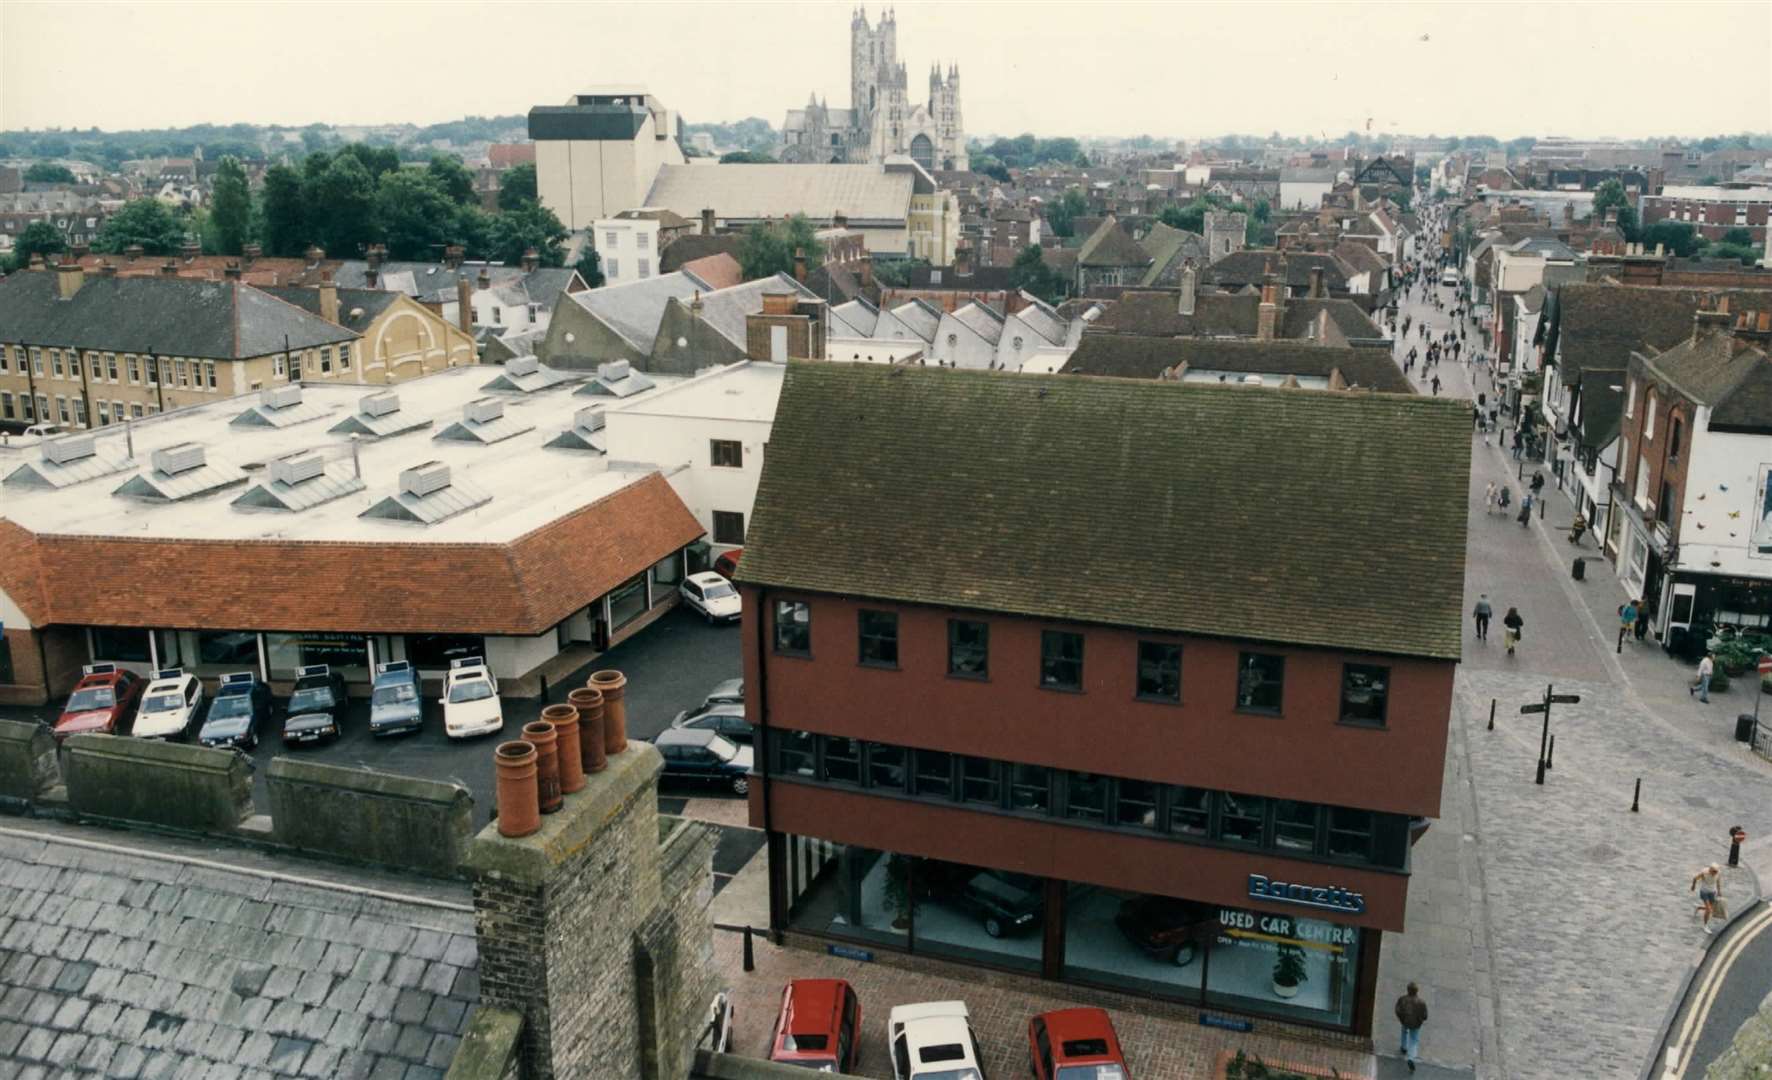 Taken from the top of Westgate Towers, Canterbury in 1992. Barretts showroom down below and the old Marlowe Theatre can be seen